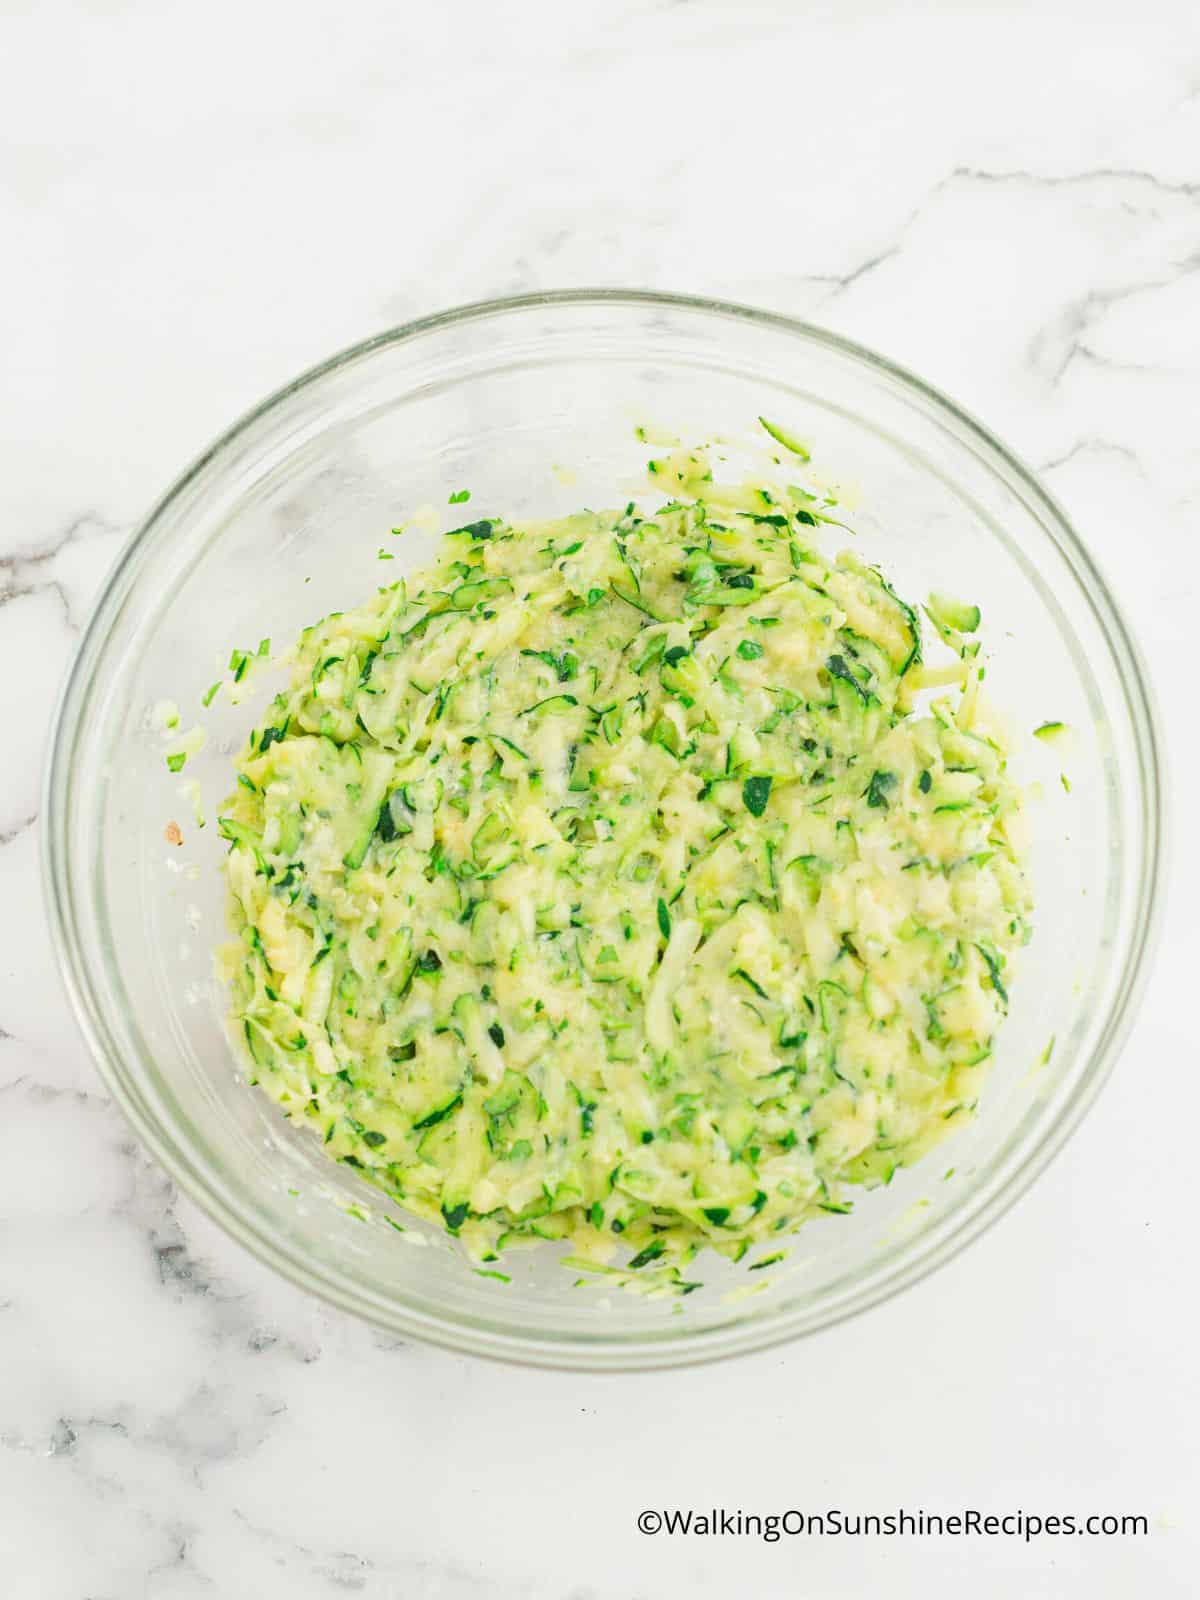 grated zucchini and ingredients in glass bowl.